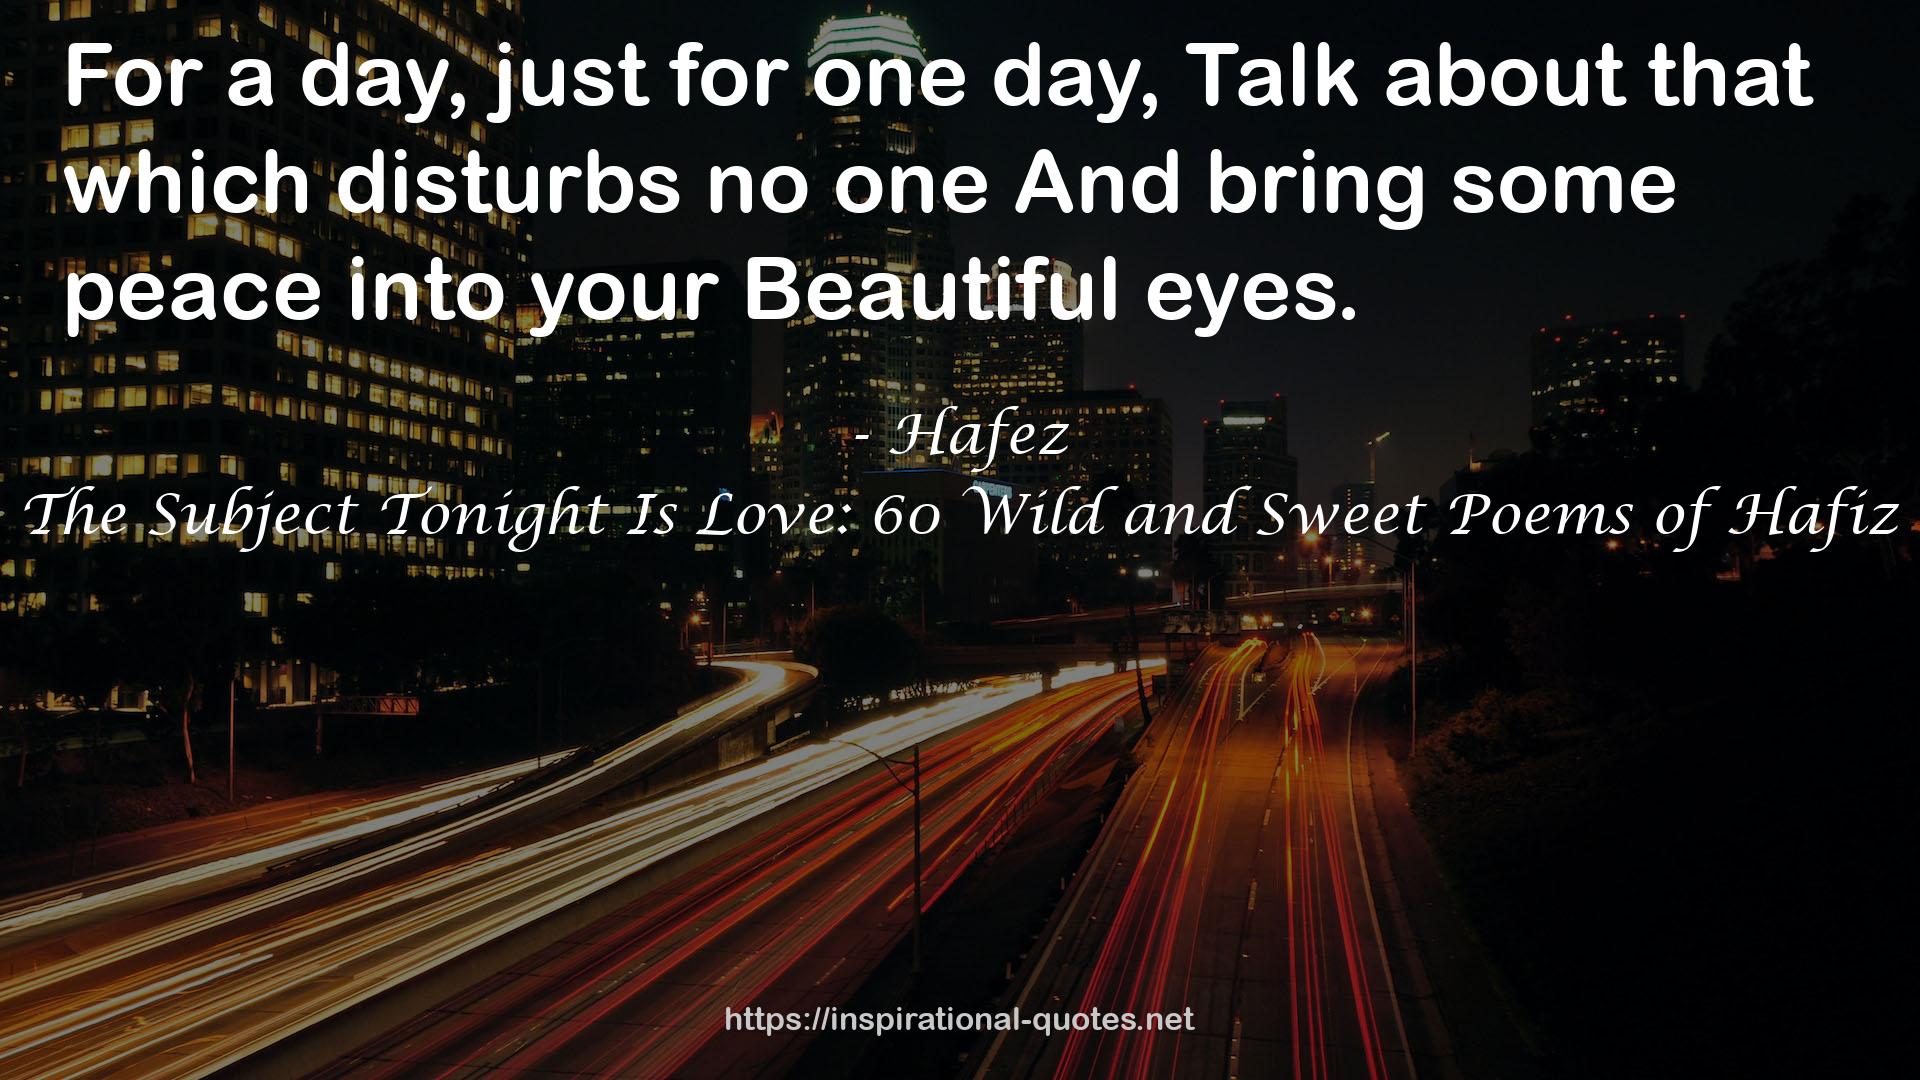 The Subject Tonight Is Love: 60 Wild and Sweet Poems of Hafiz QUOTES